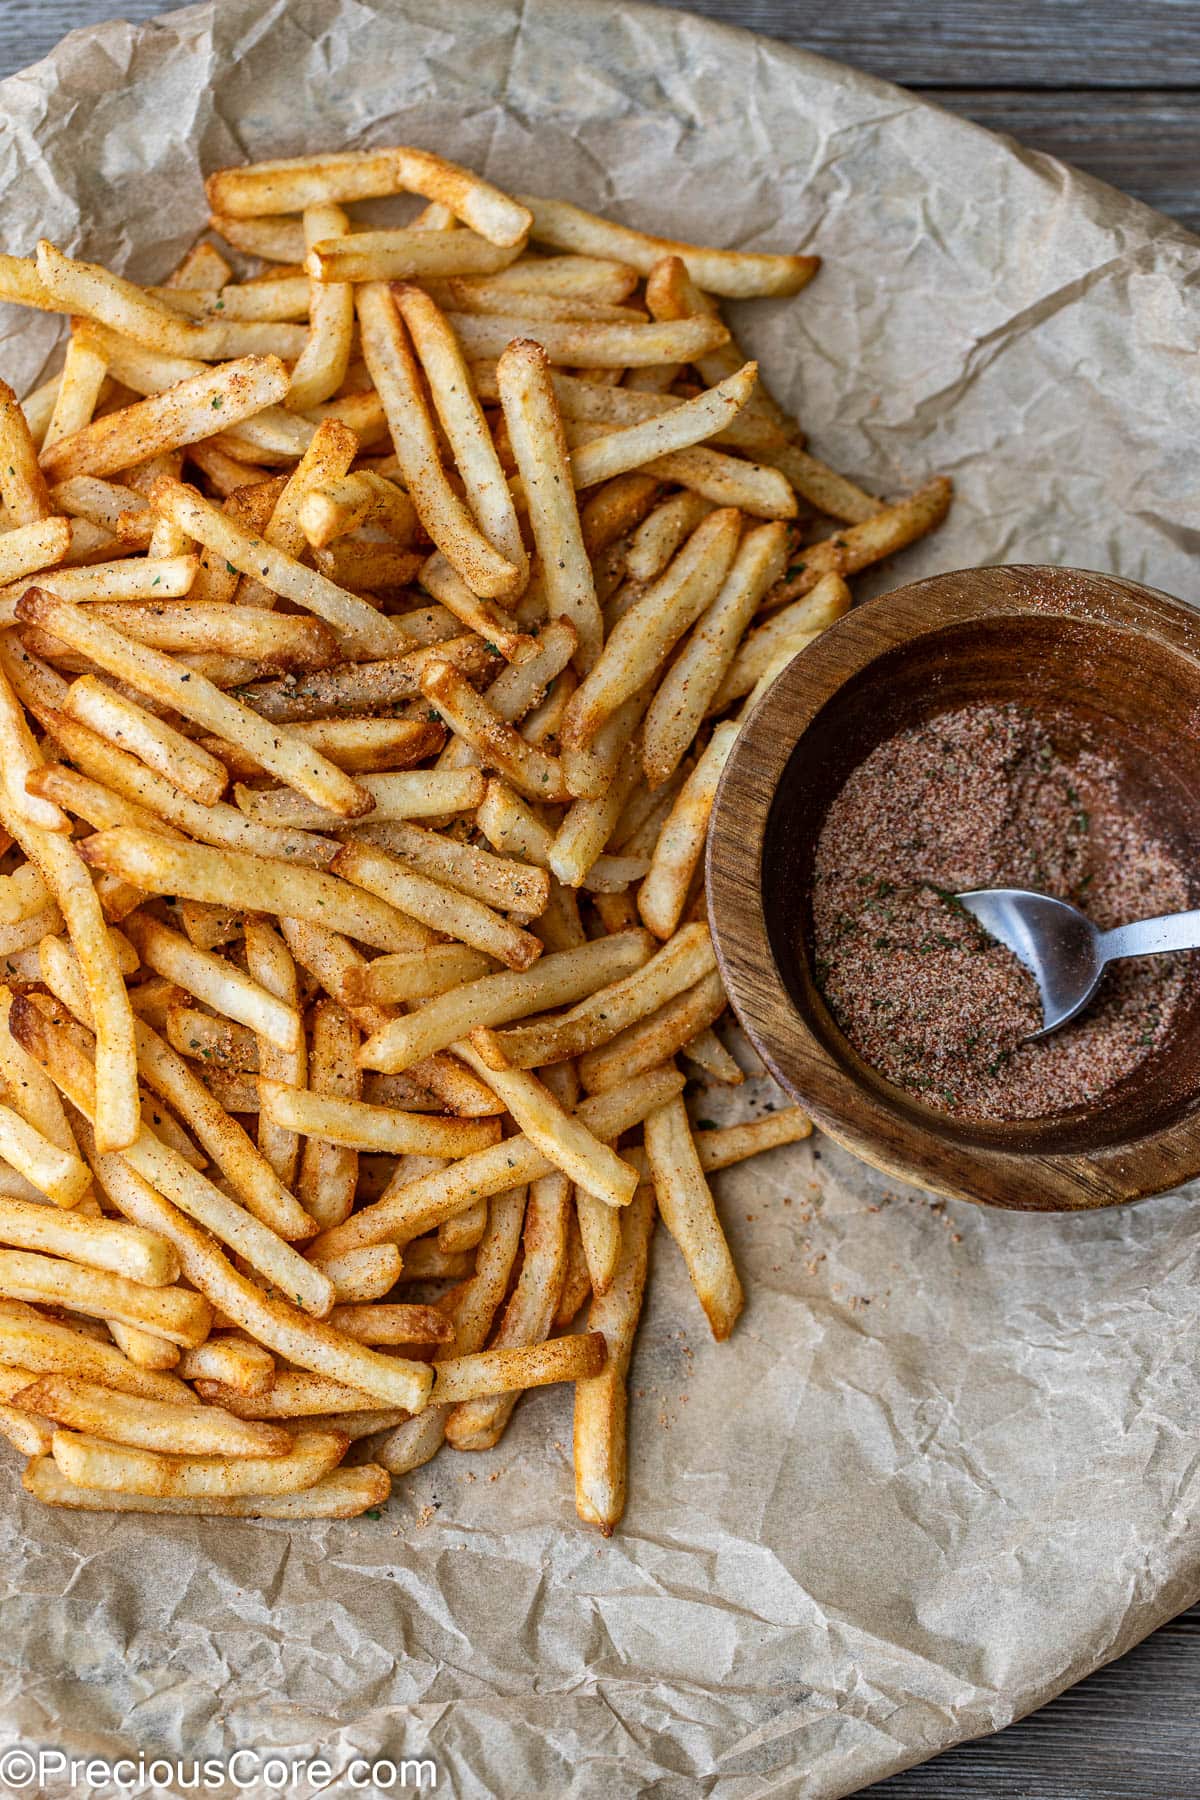 Fries on brown parchment paper with seasoning sprinkled on them.